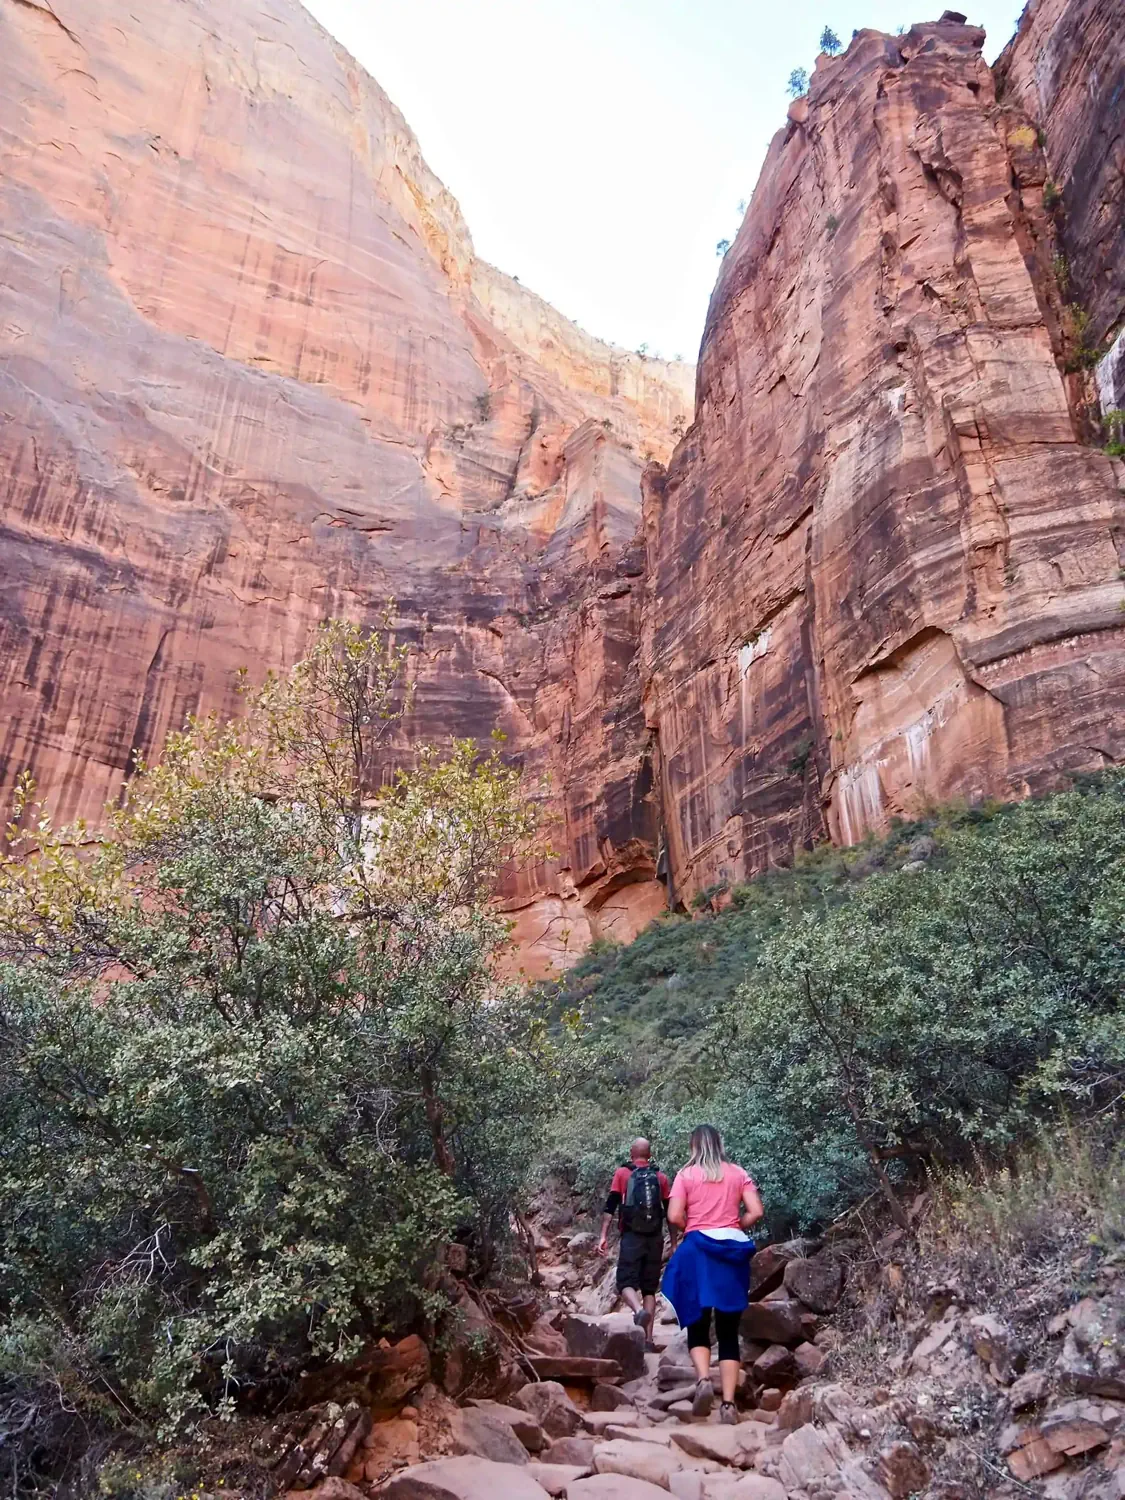 We are approaching the massive cliff walls that surround the Emerald Pools